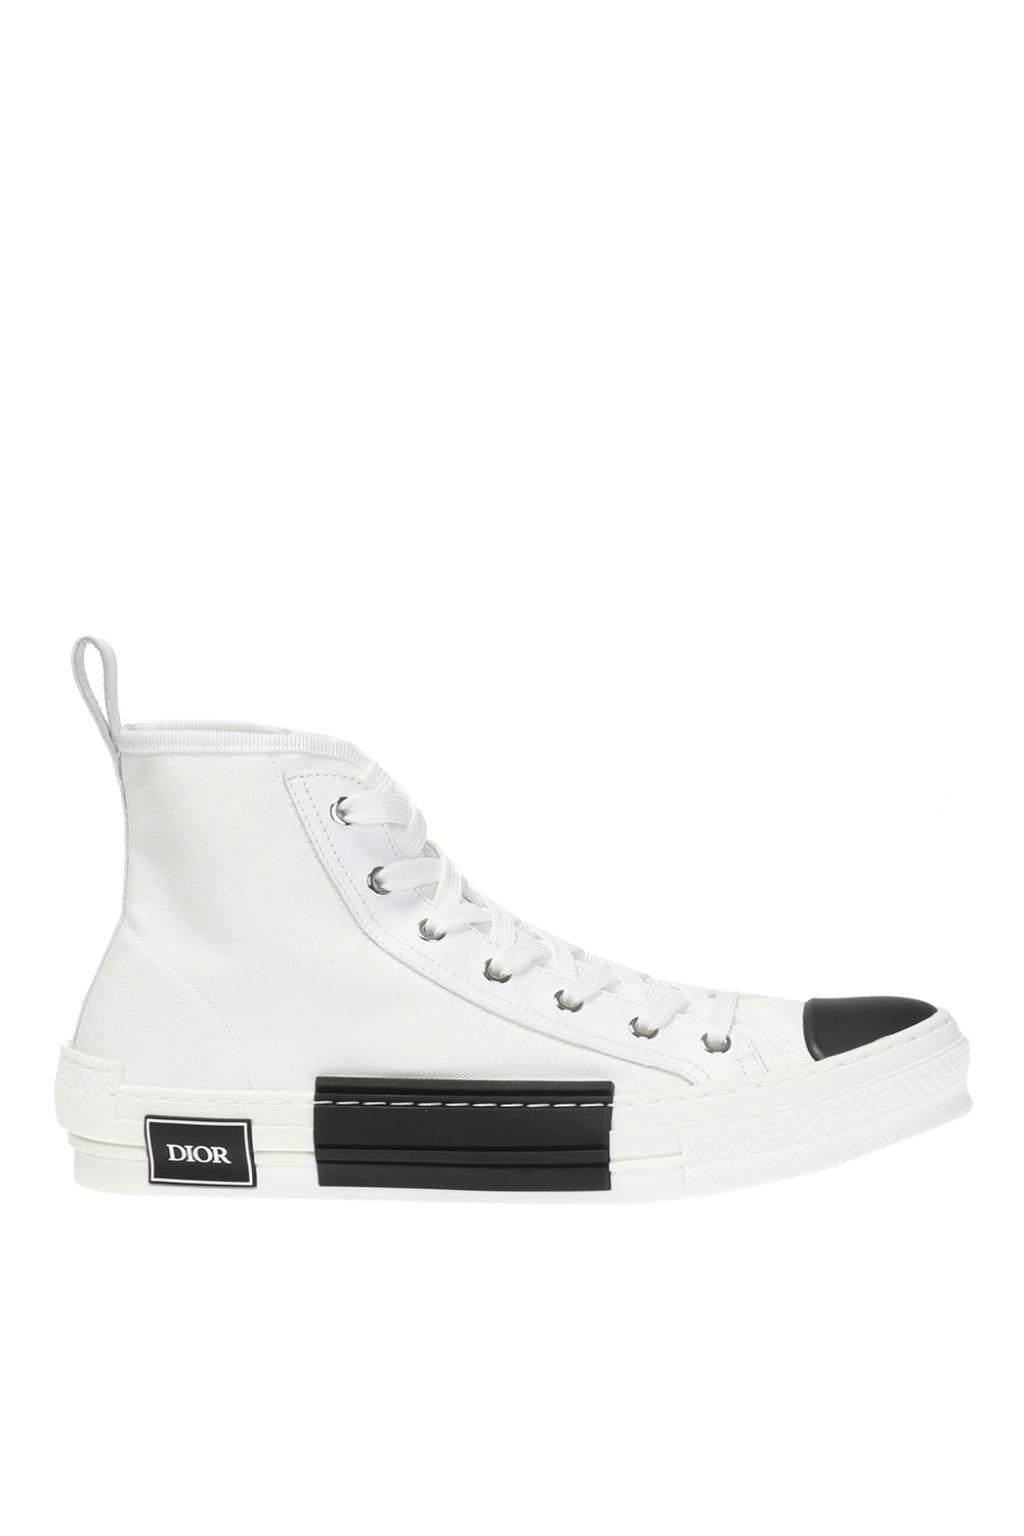 Dior 'b23' High-top Sneakers in White for Men | Lyst